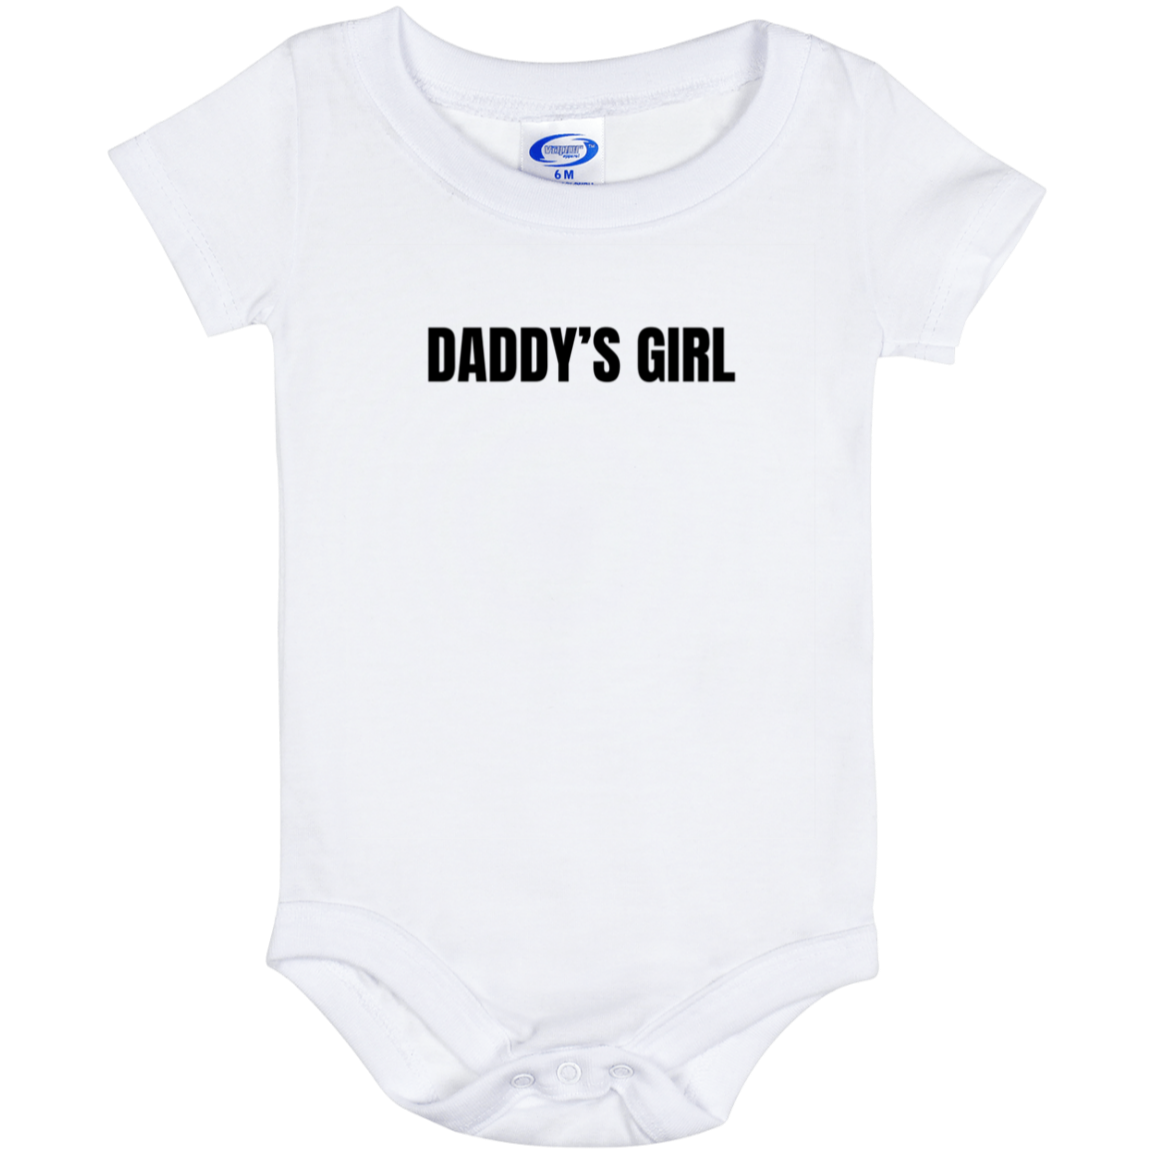 Daddy's Girl - Baby Onesie 6, 12, & 24 Month